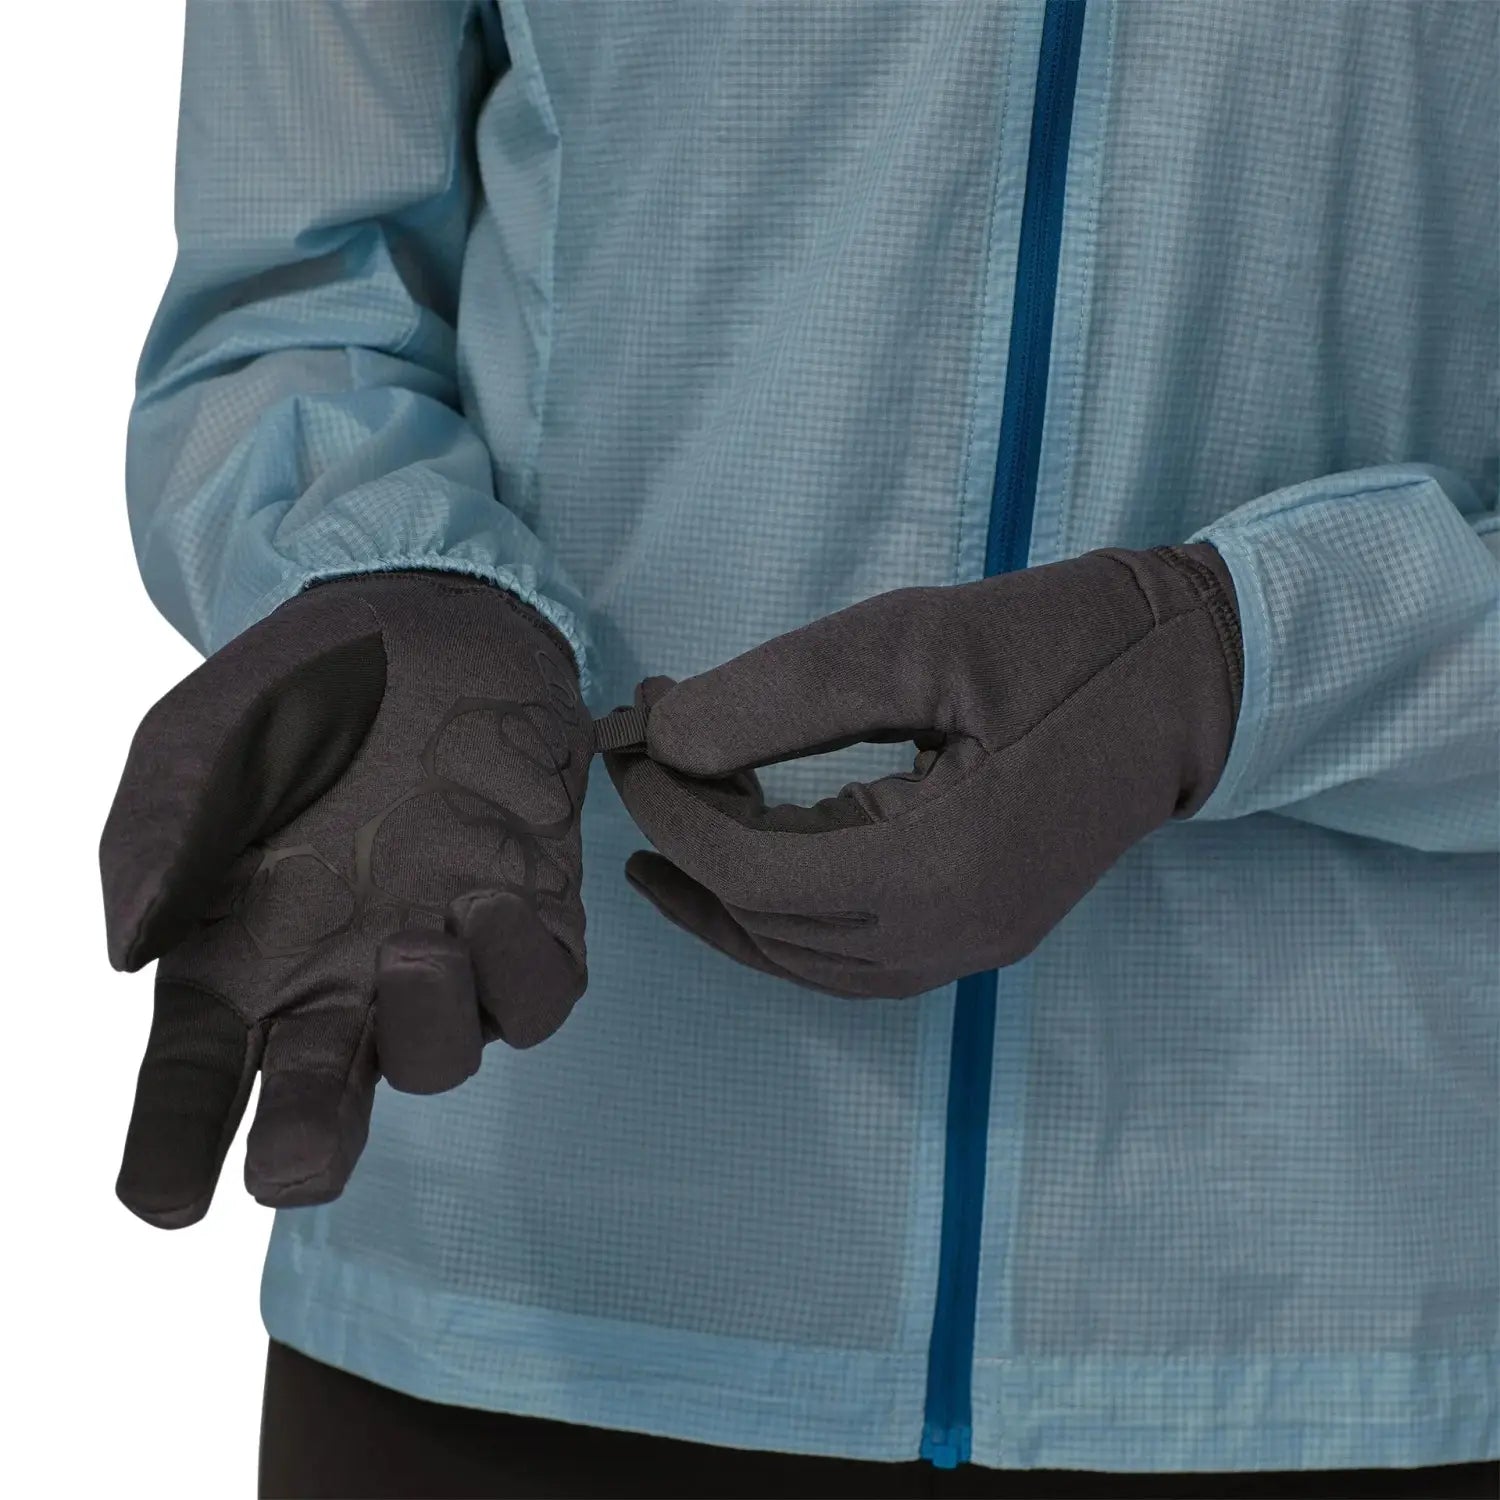 Patagonia R1® Daily Gloves, Ink Black, view of gloves on model